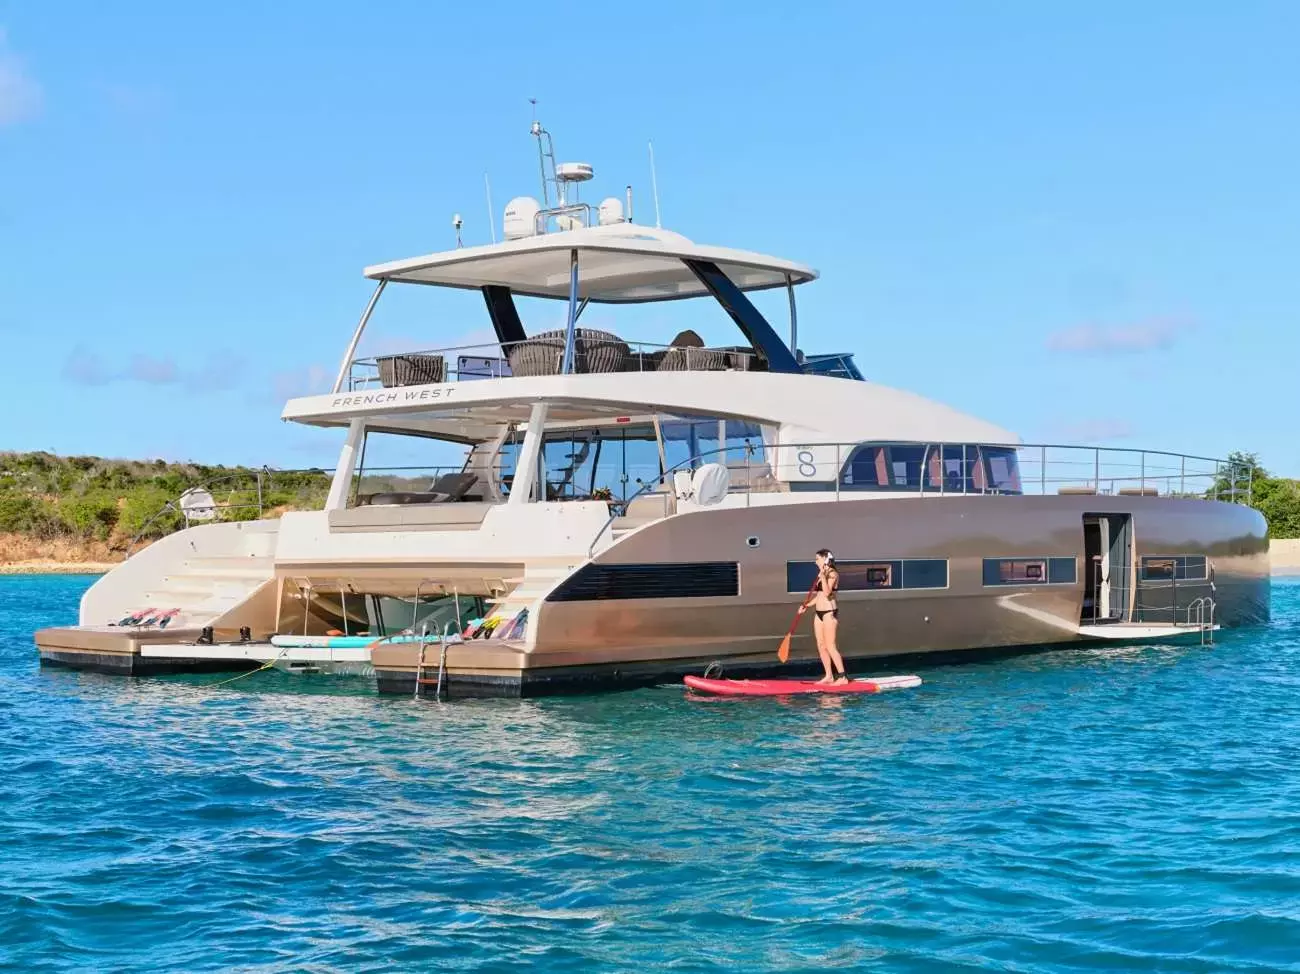 Frenchwest by Lagoon - Top rates for a Rental of a private Power Catamaran in St Martin